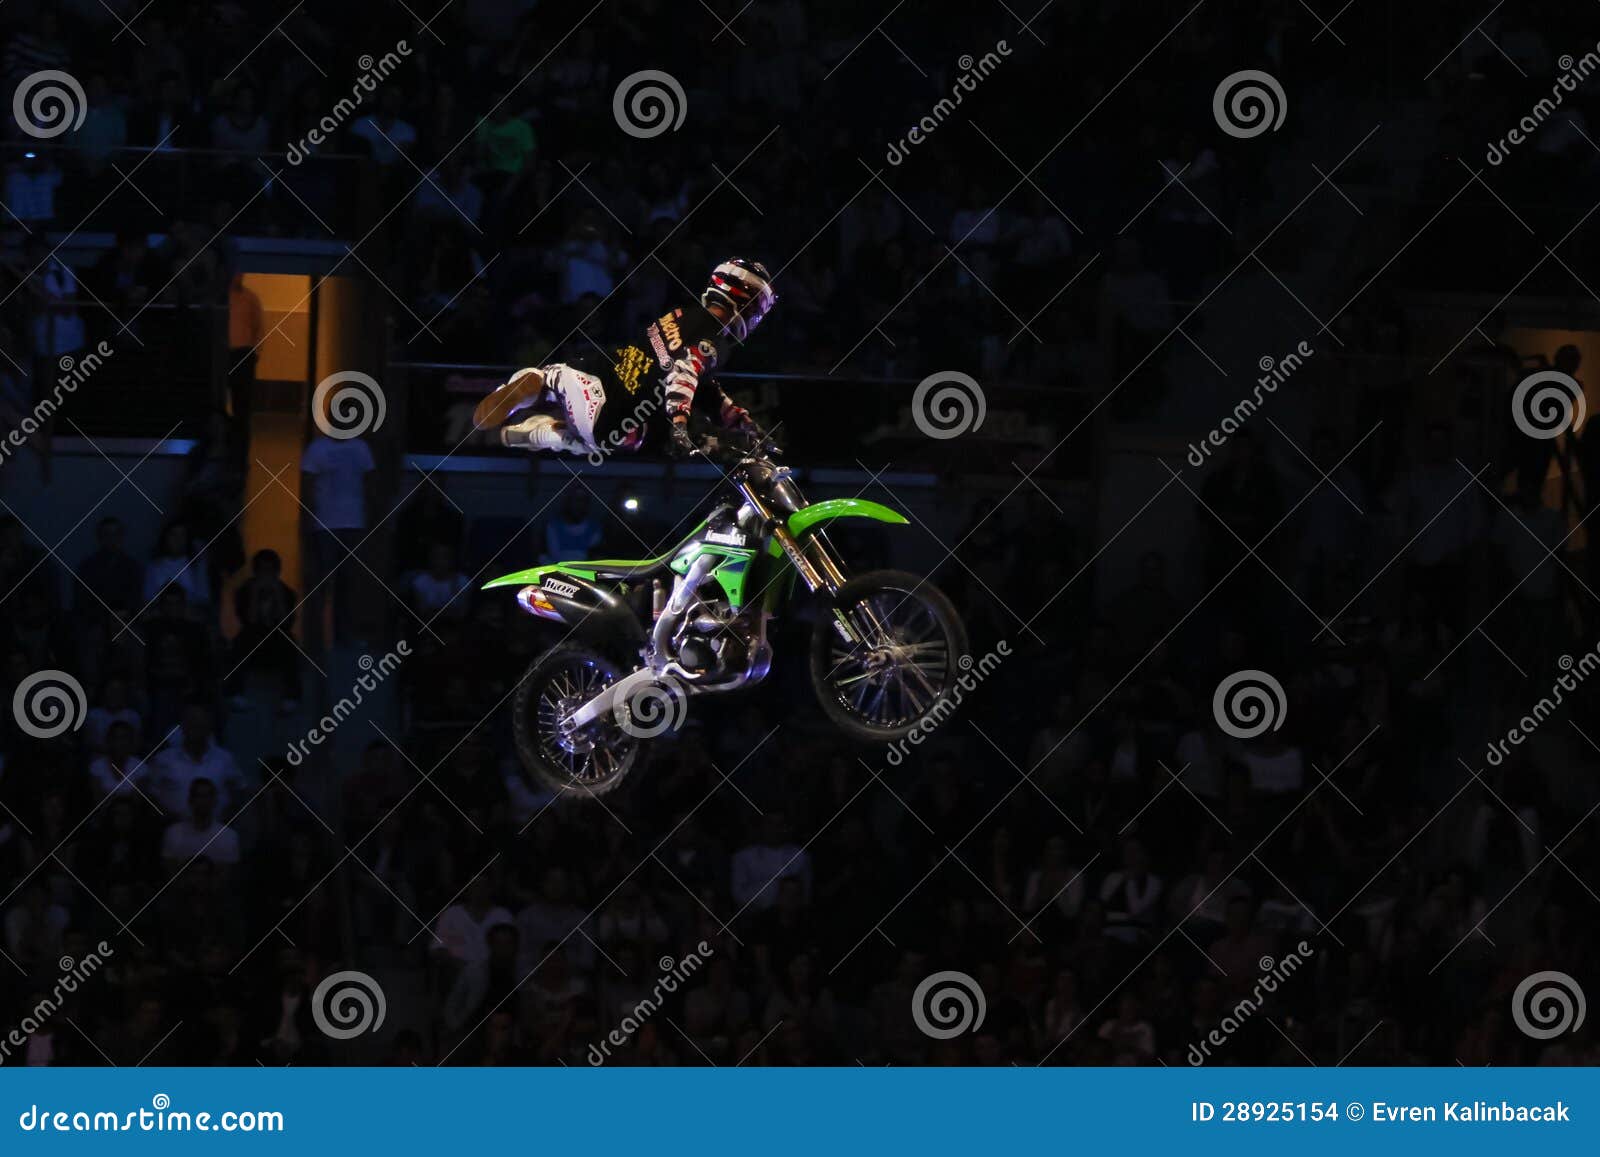 Unidentified driver jumping during Ulker Metro Moto Heroes FMX Freestyle Motocross Motorcycle Stunt Show in Ulker Sports Arena on October 13, 2012 in Istanbul, Turkey.